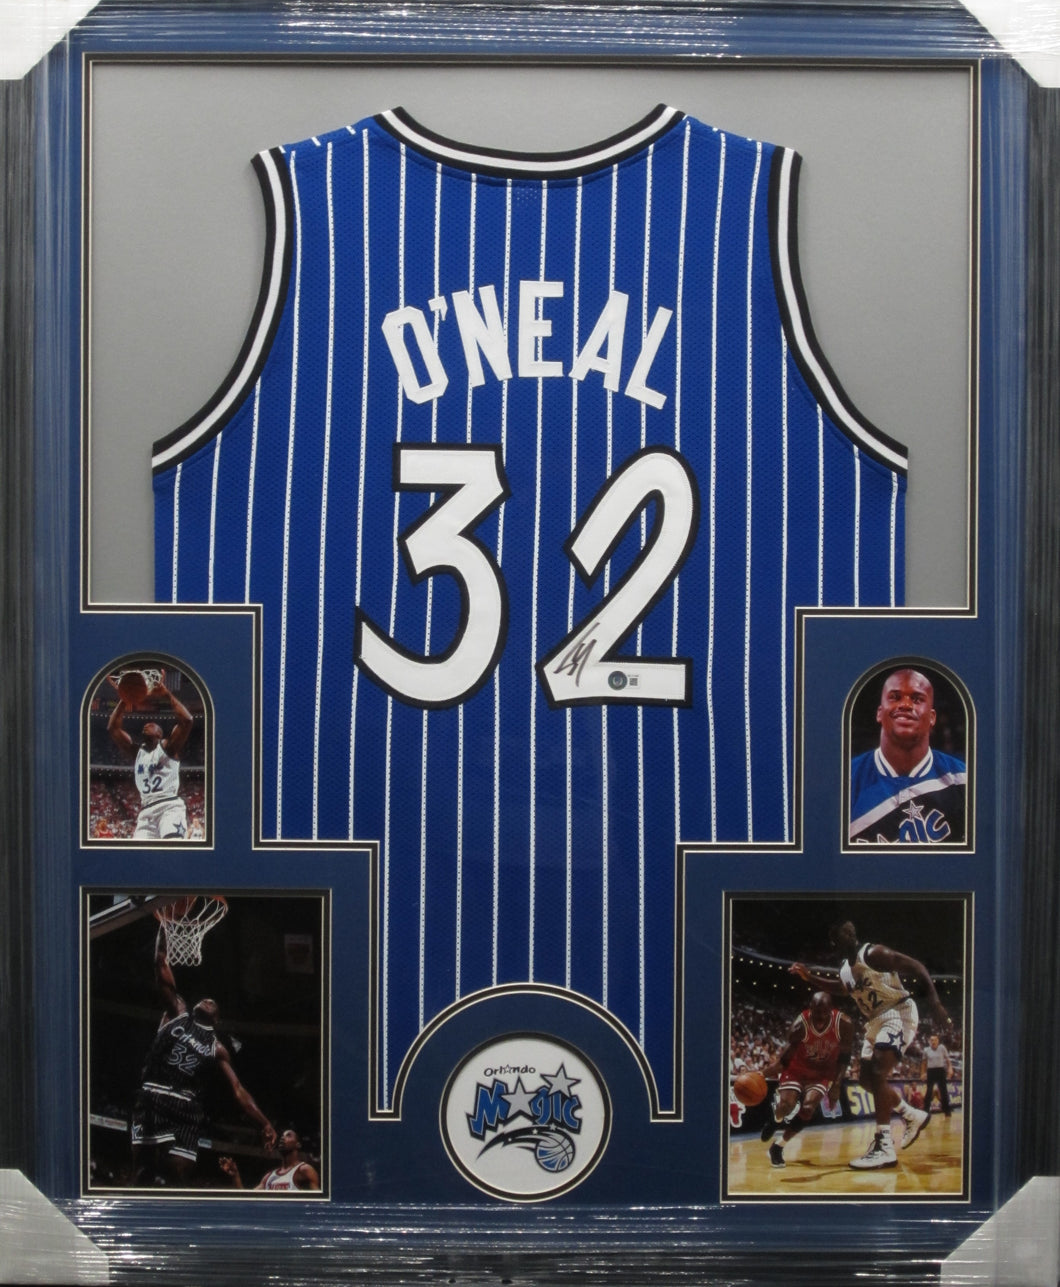 Orlando Magic Shaquille O'Neal Signed Jersey Framed & Matted with BECKETT COA